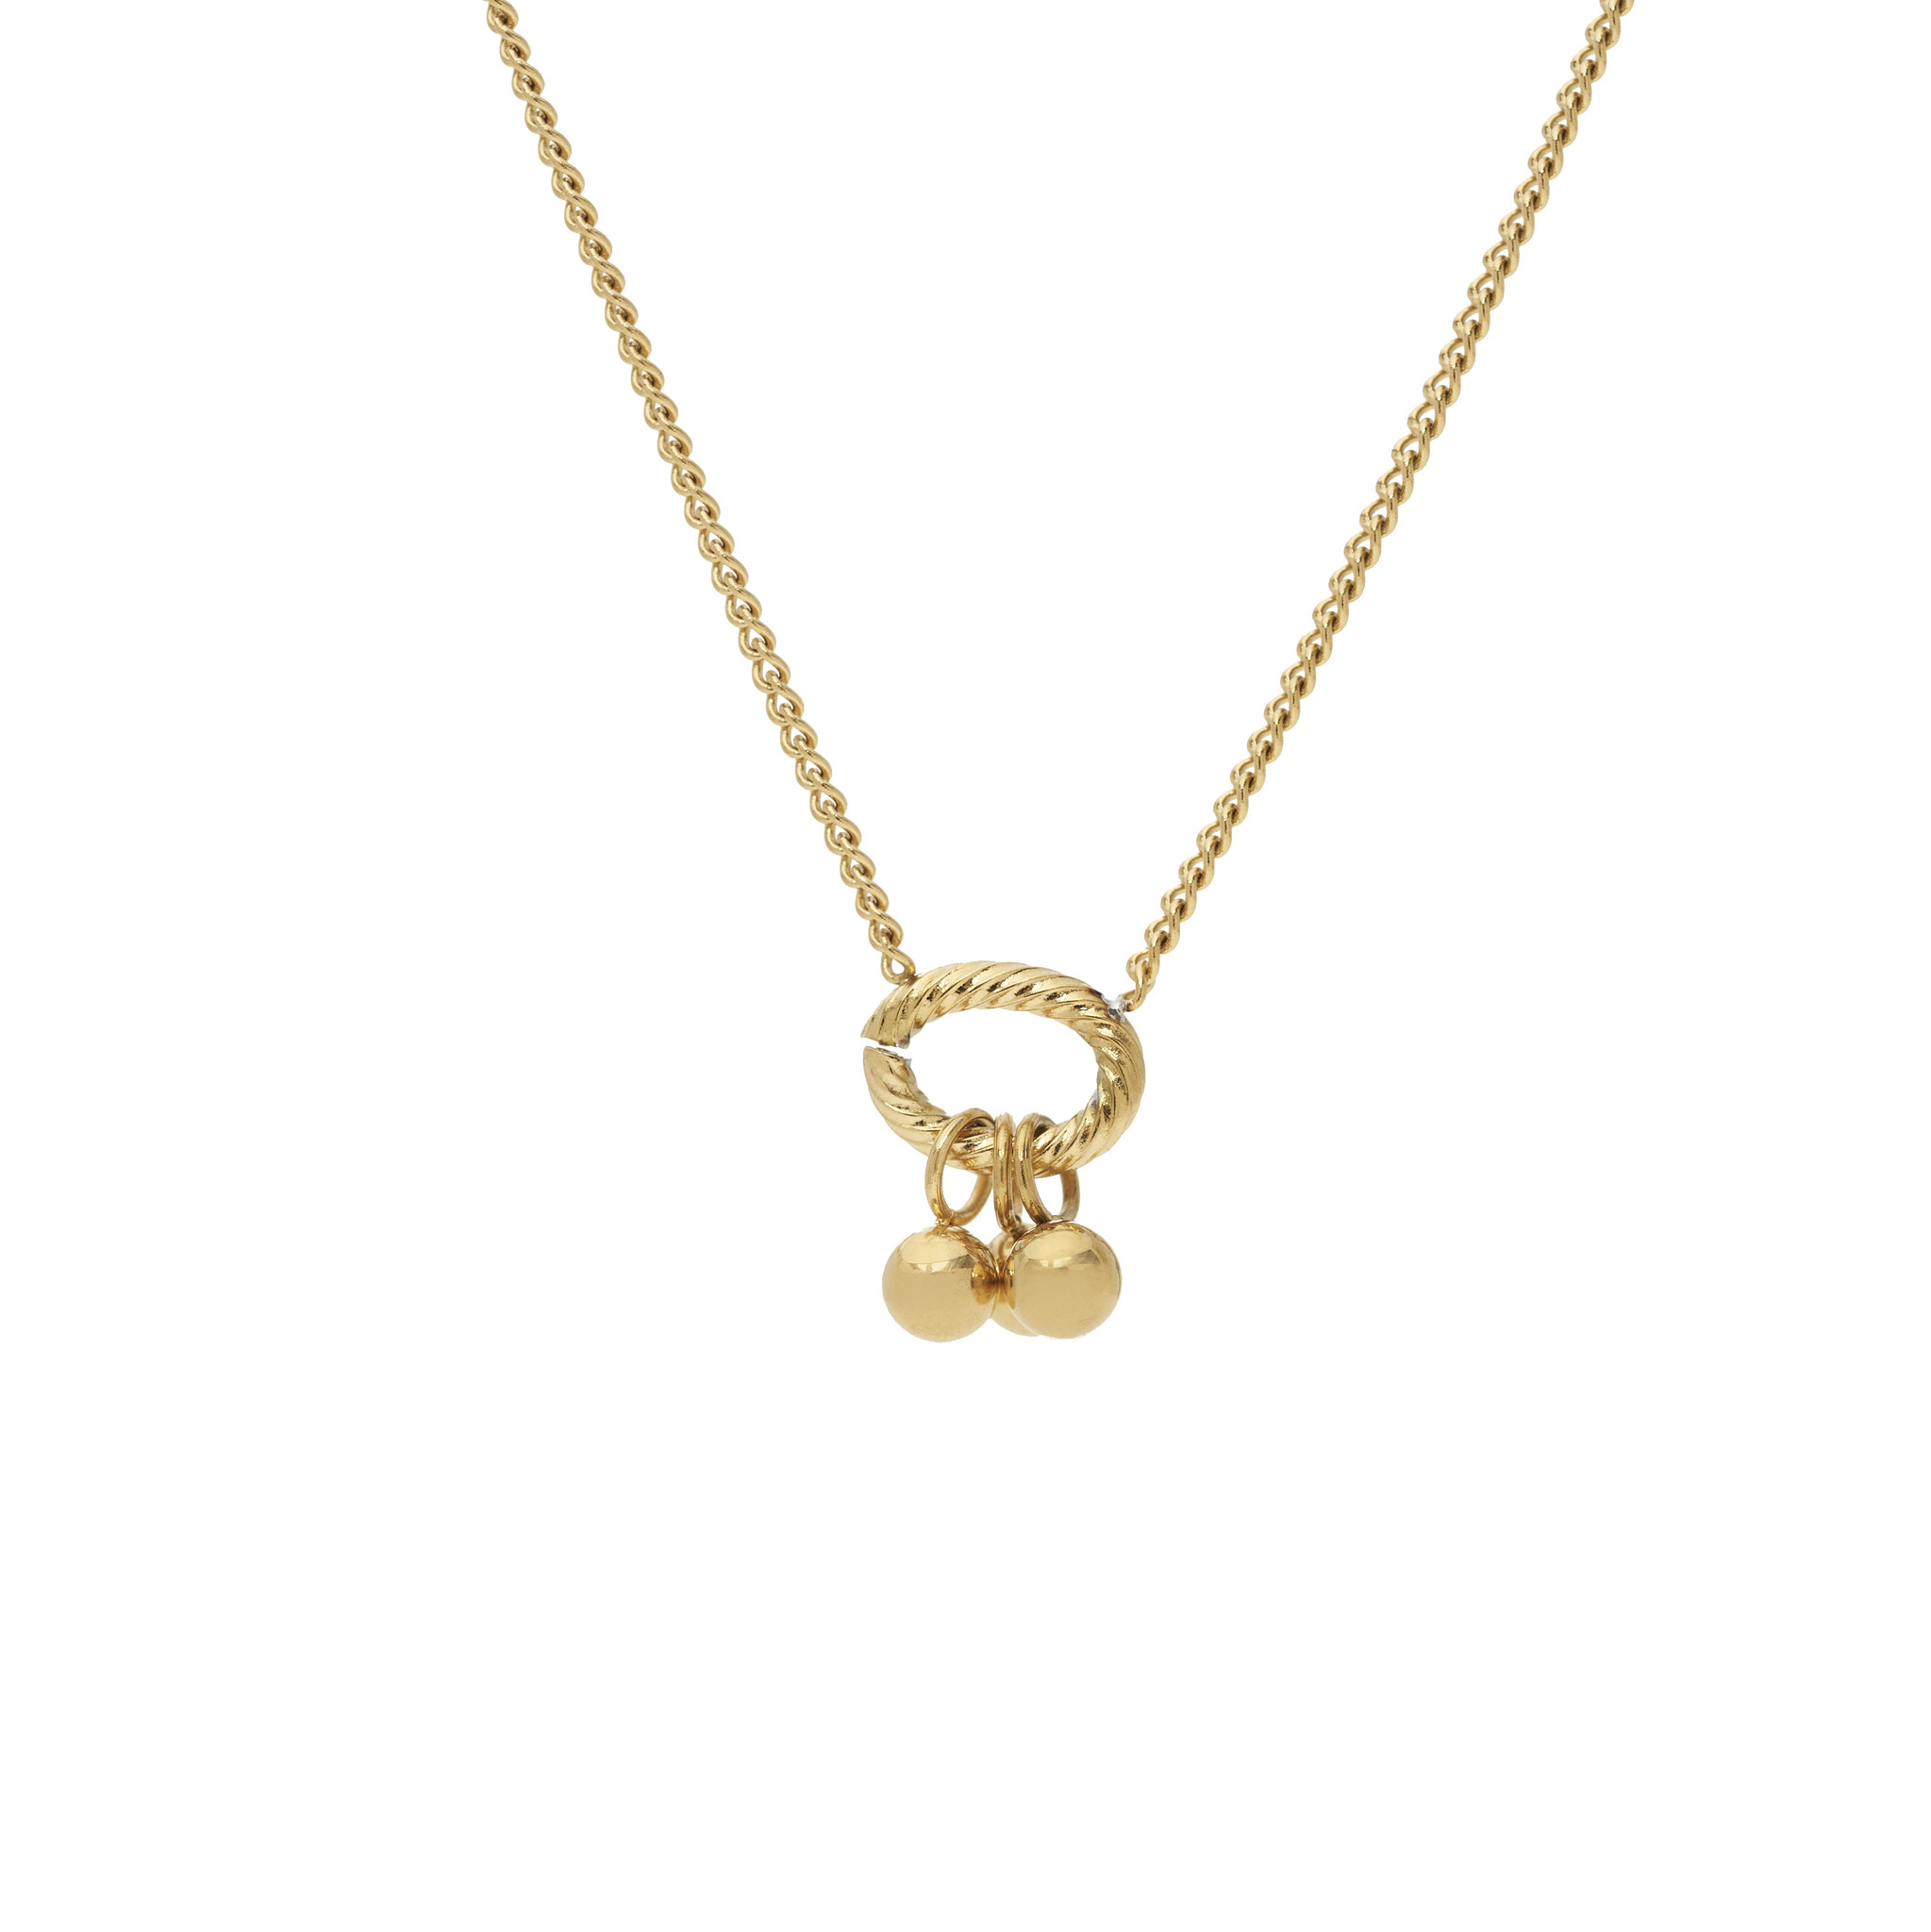 Ketting chain luxe 3 balletjes goud - MADAM the label